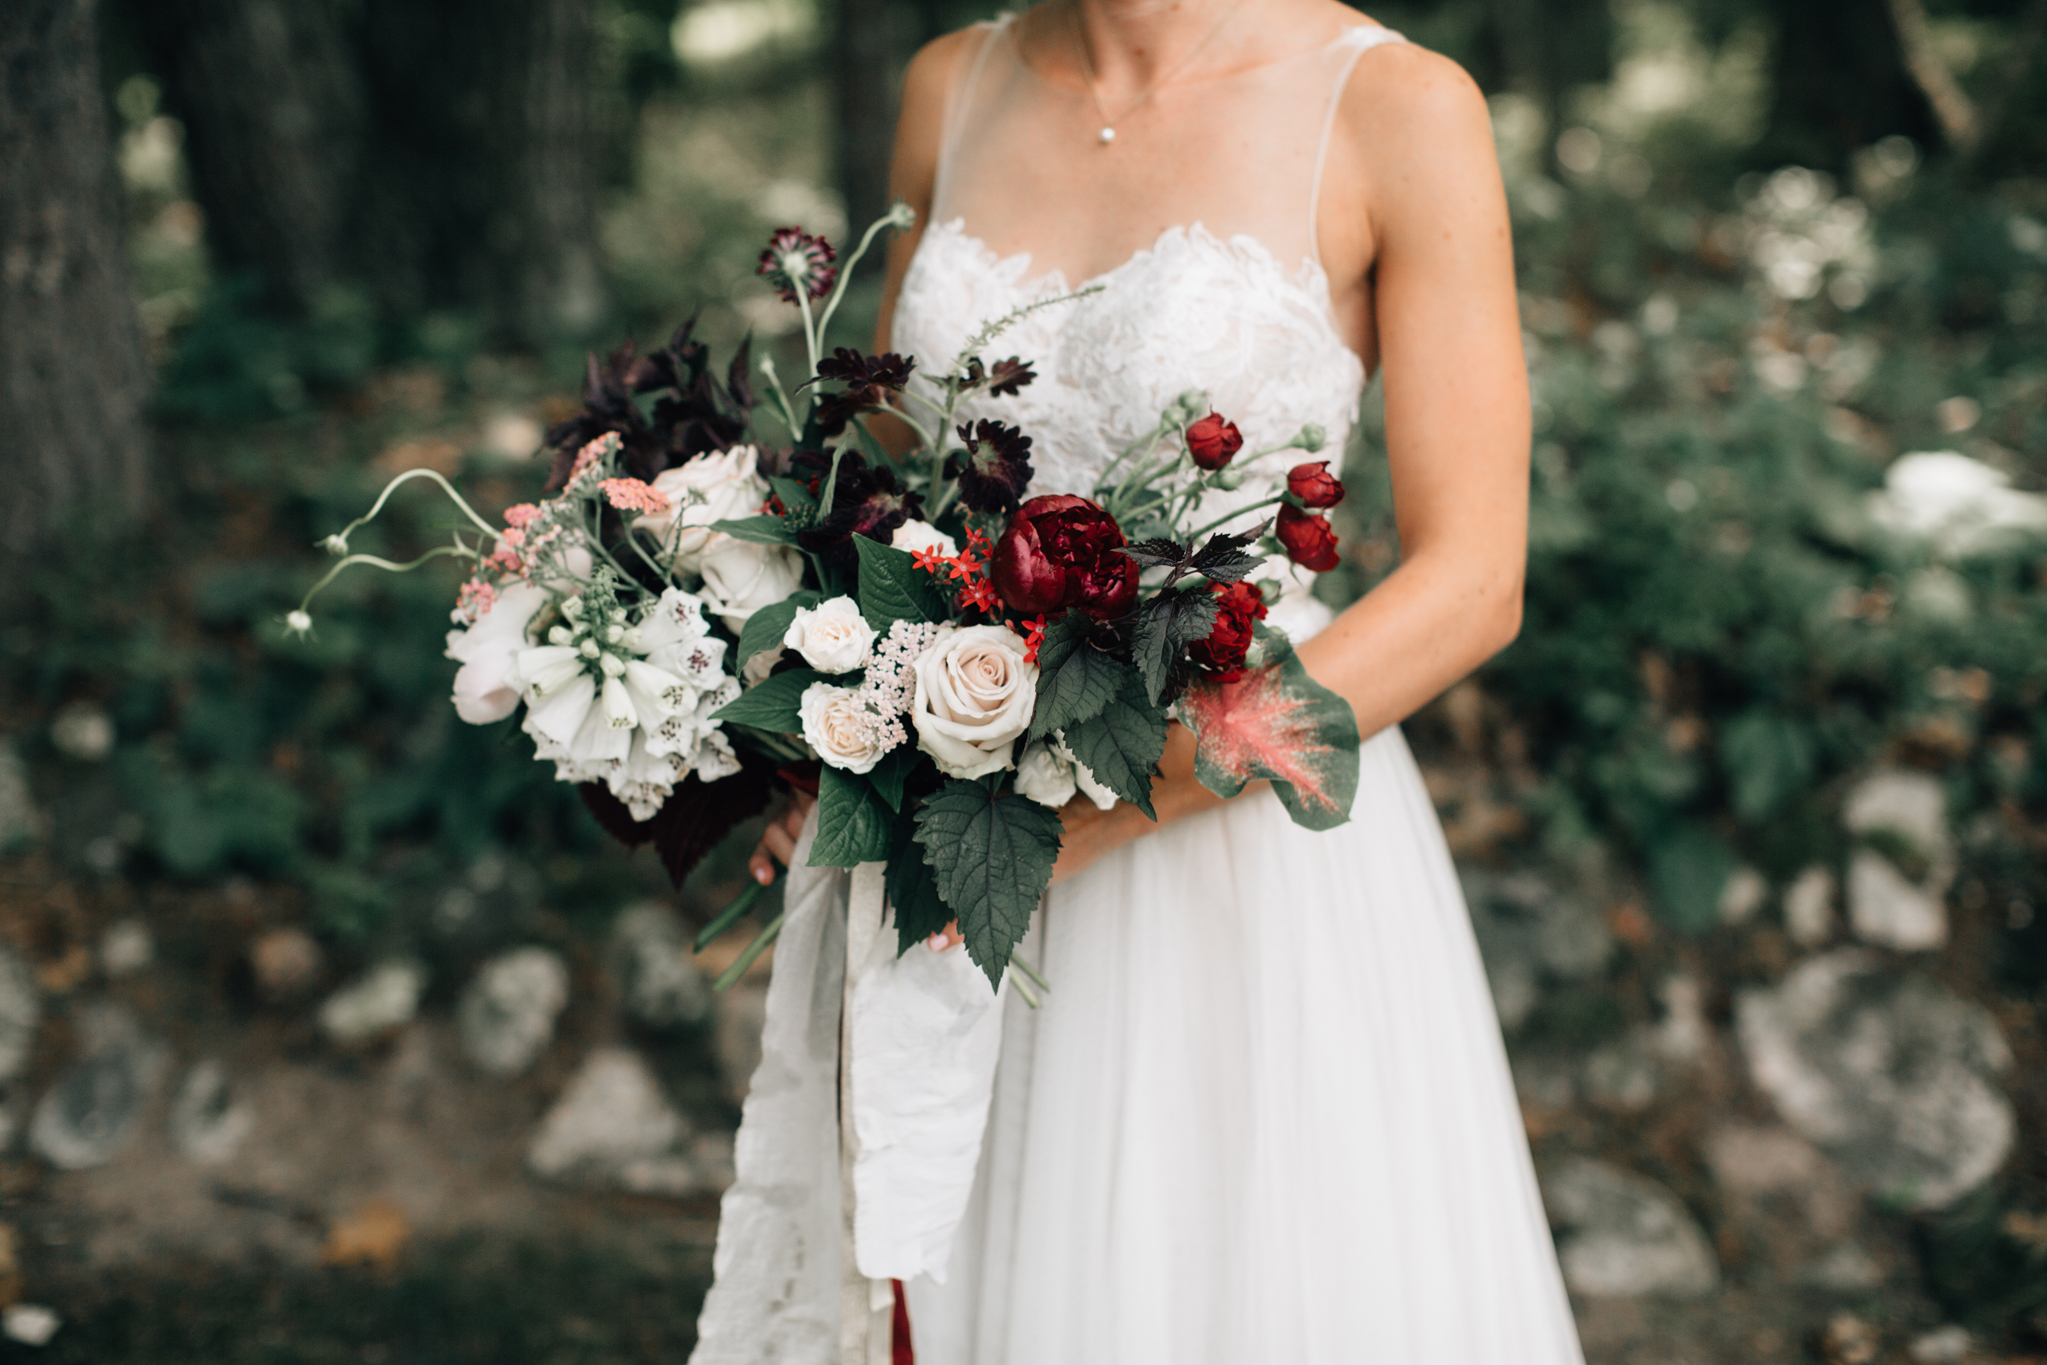 Burgundy and Blush Bouquet | The Day's Design | Bethany Small Photography